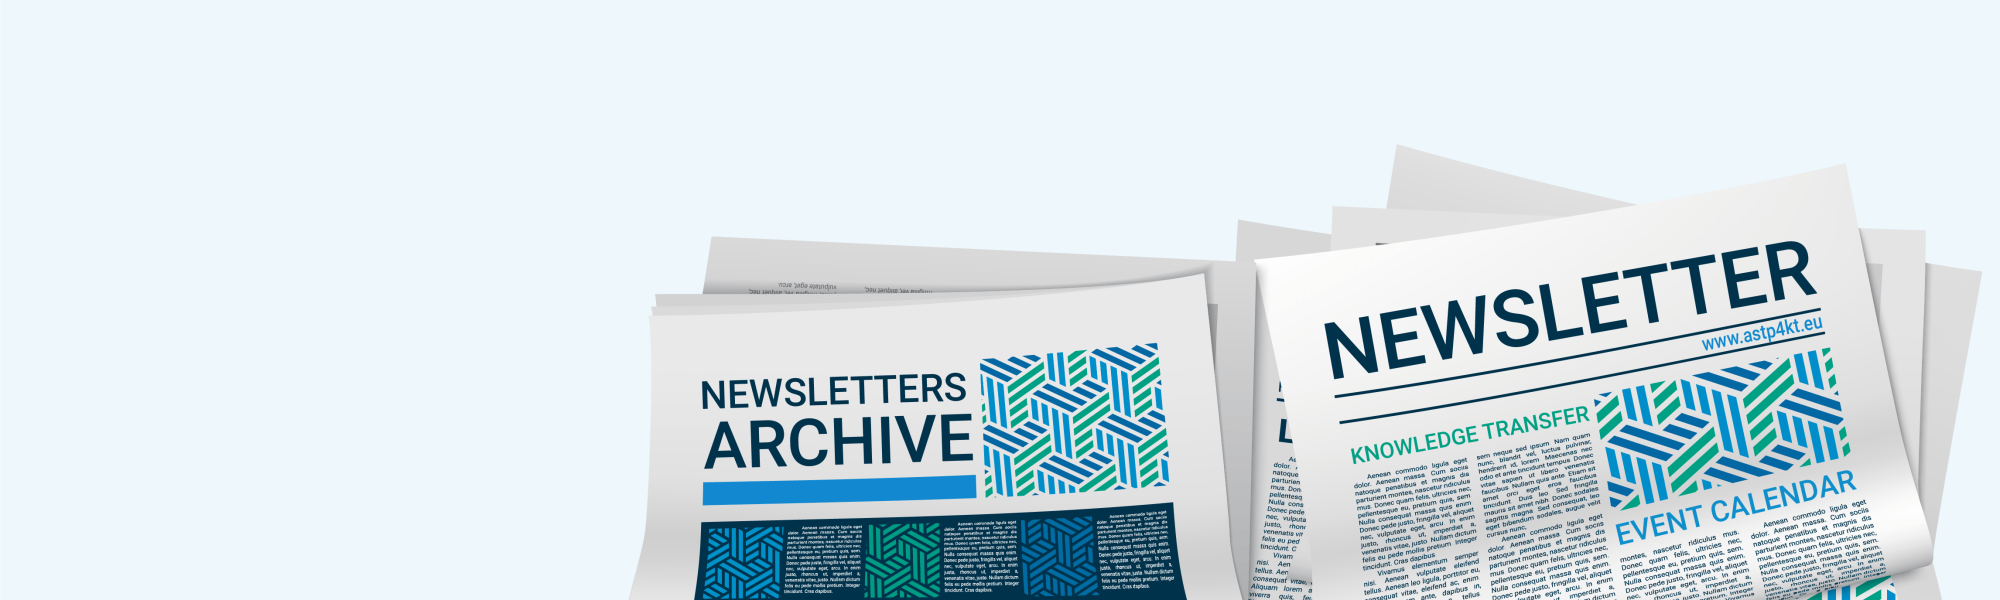 ASTP - Newsletters Archive 2022